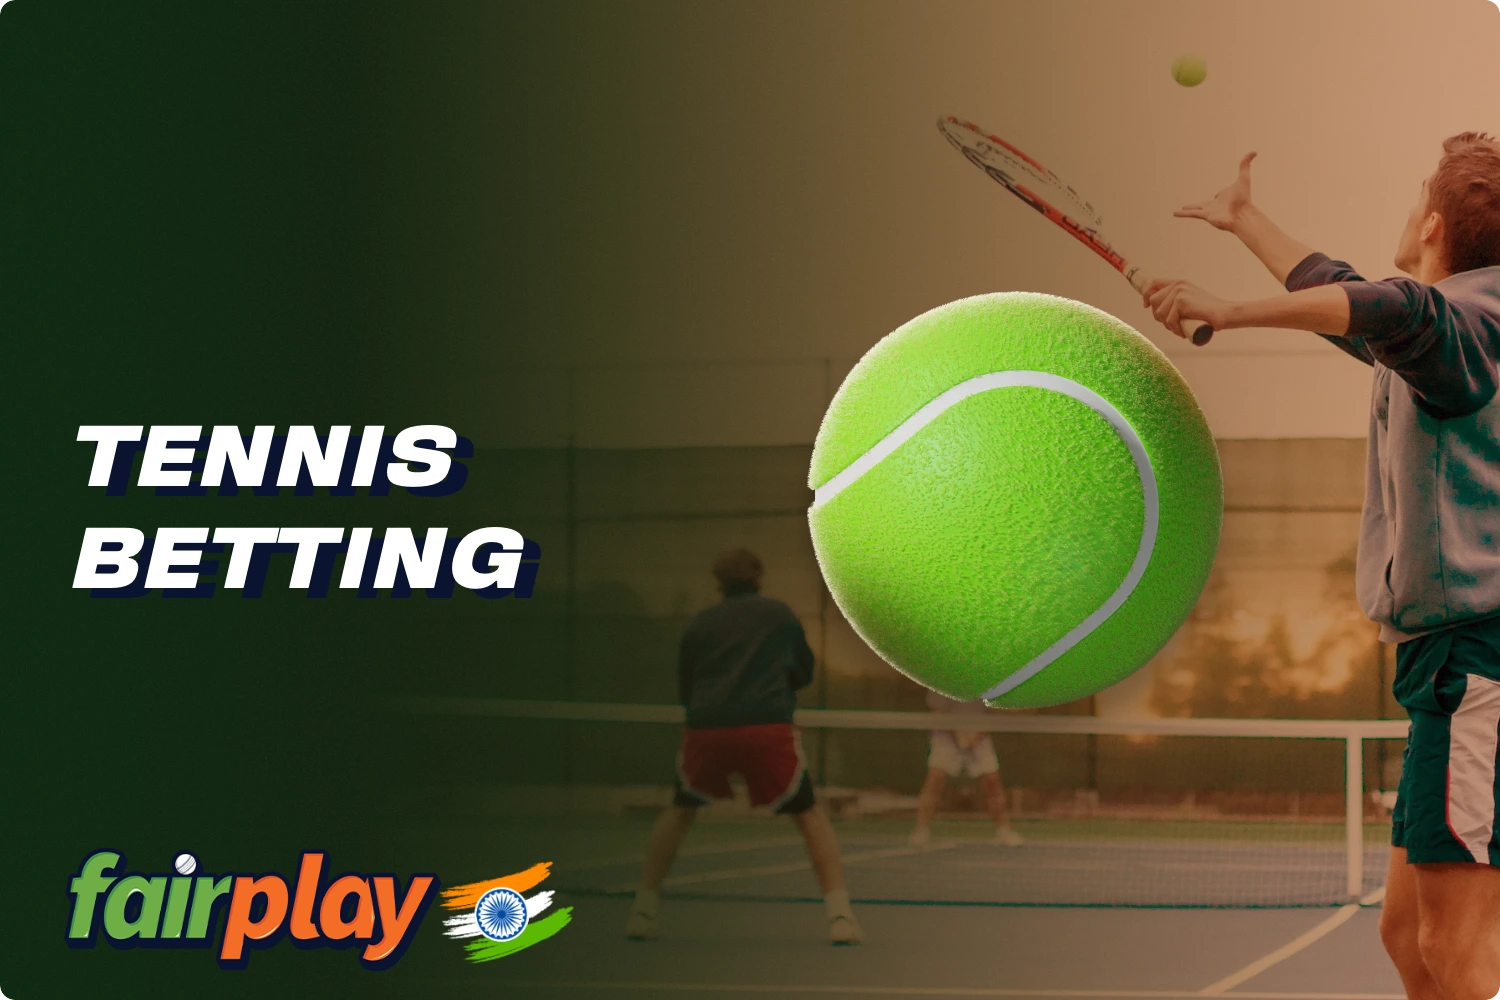 Registered Fairplay users have access to a wide range of tennis betting lines